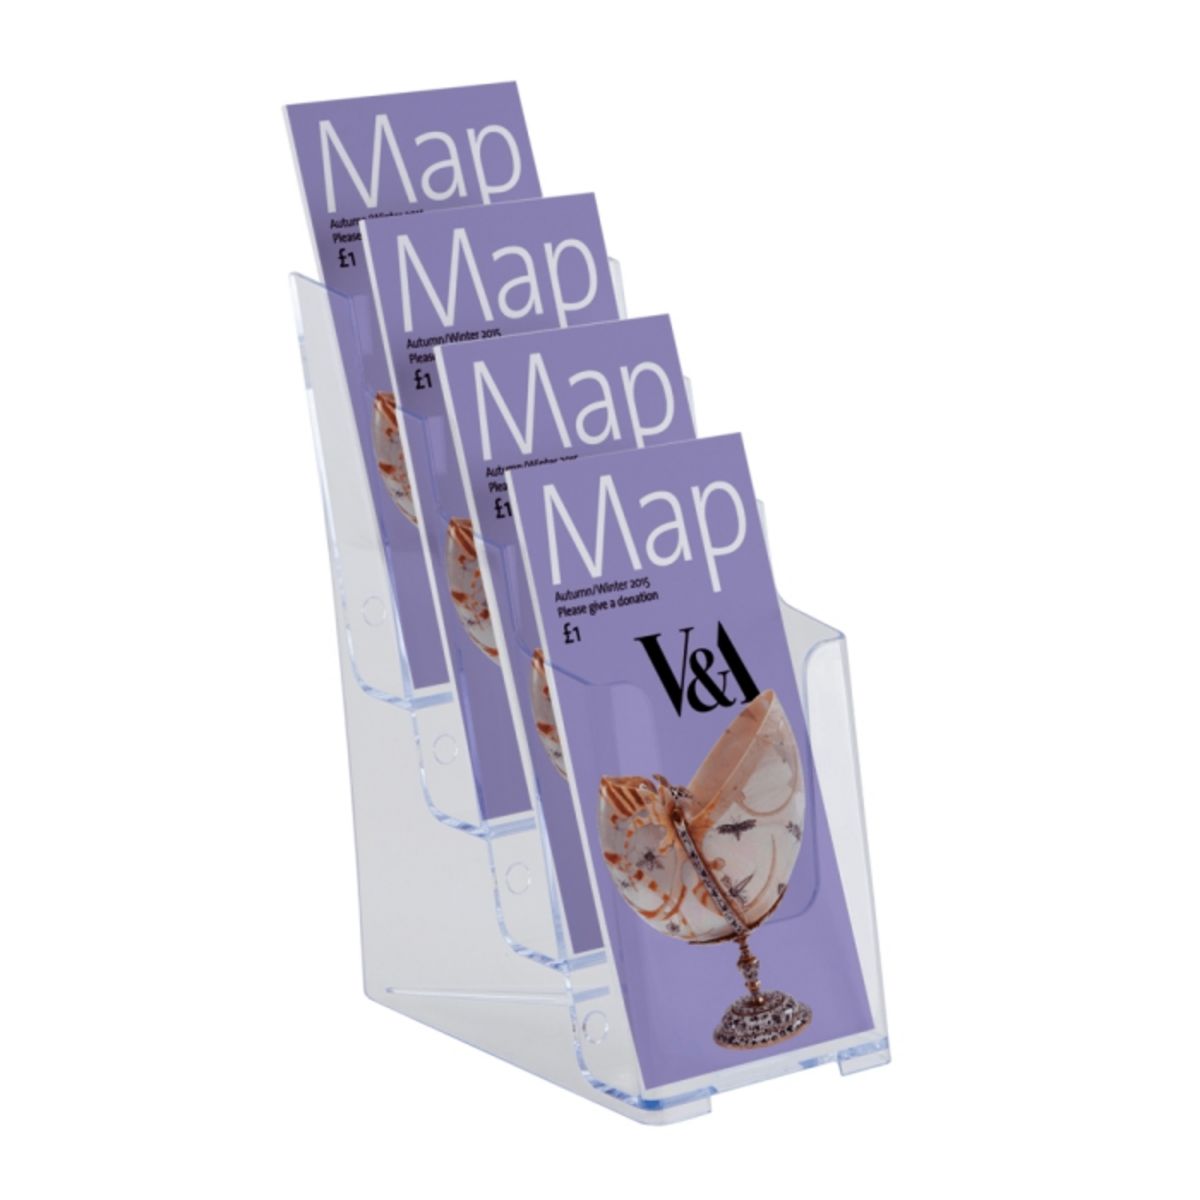 1 3rd A4 four tier wall mounted leaflet display.png